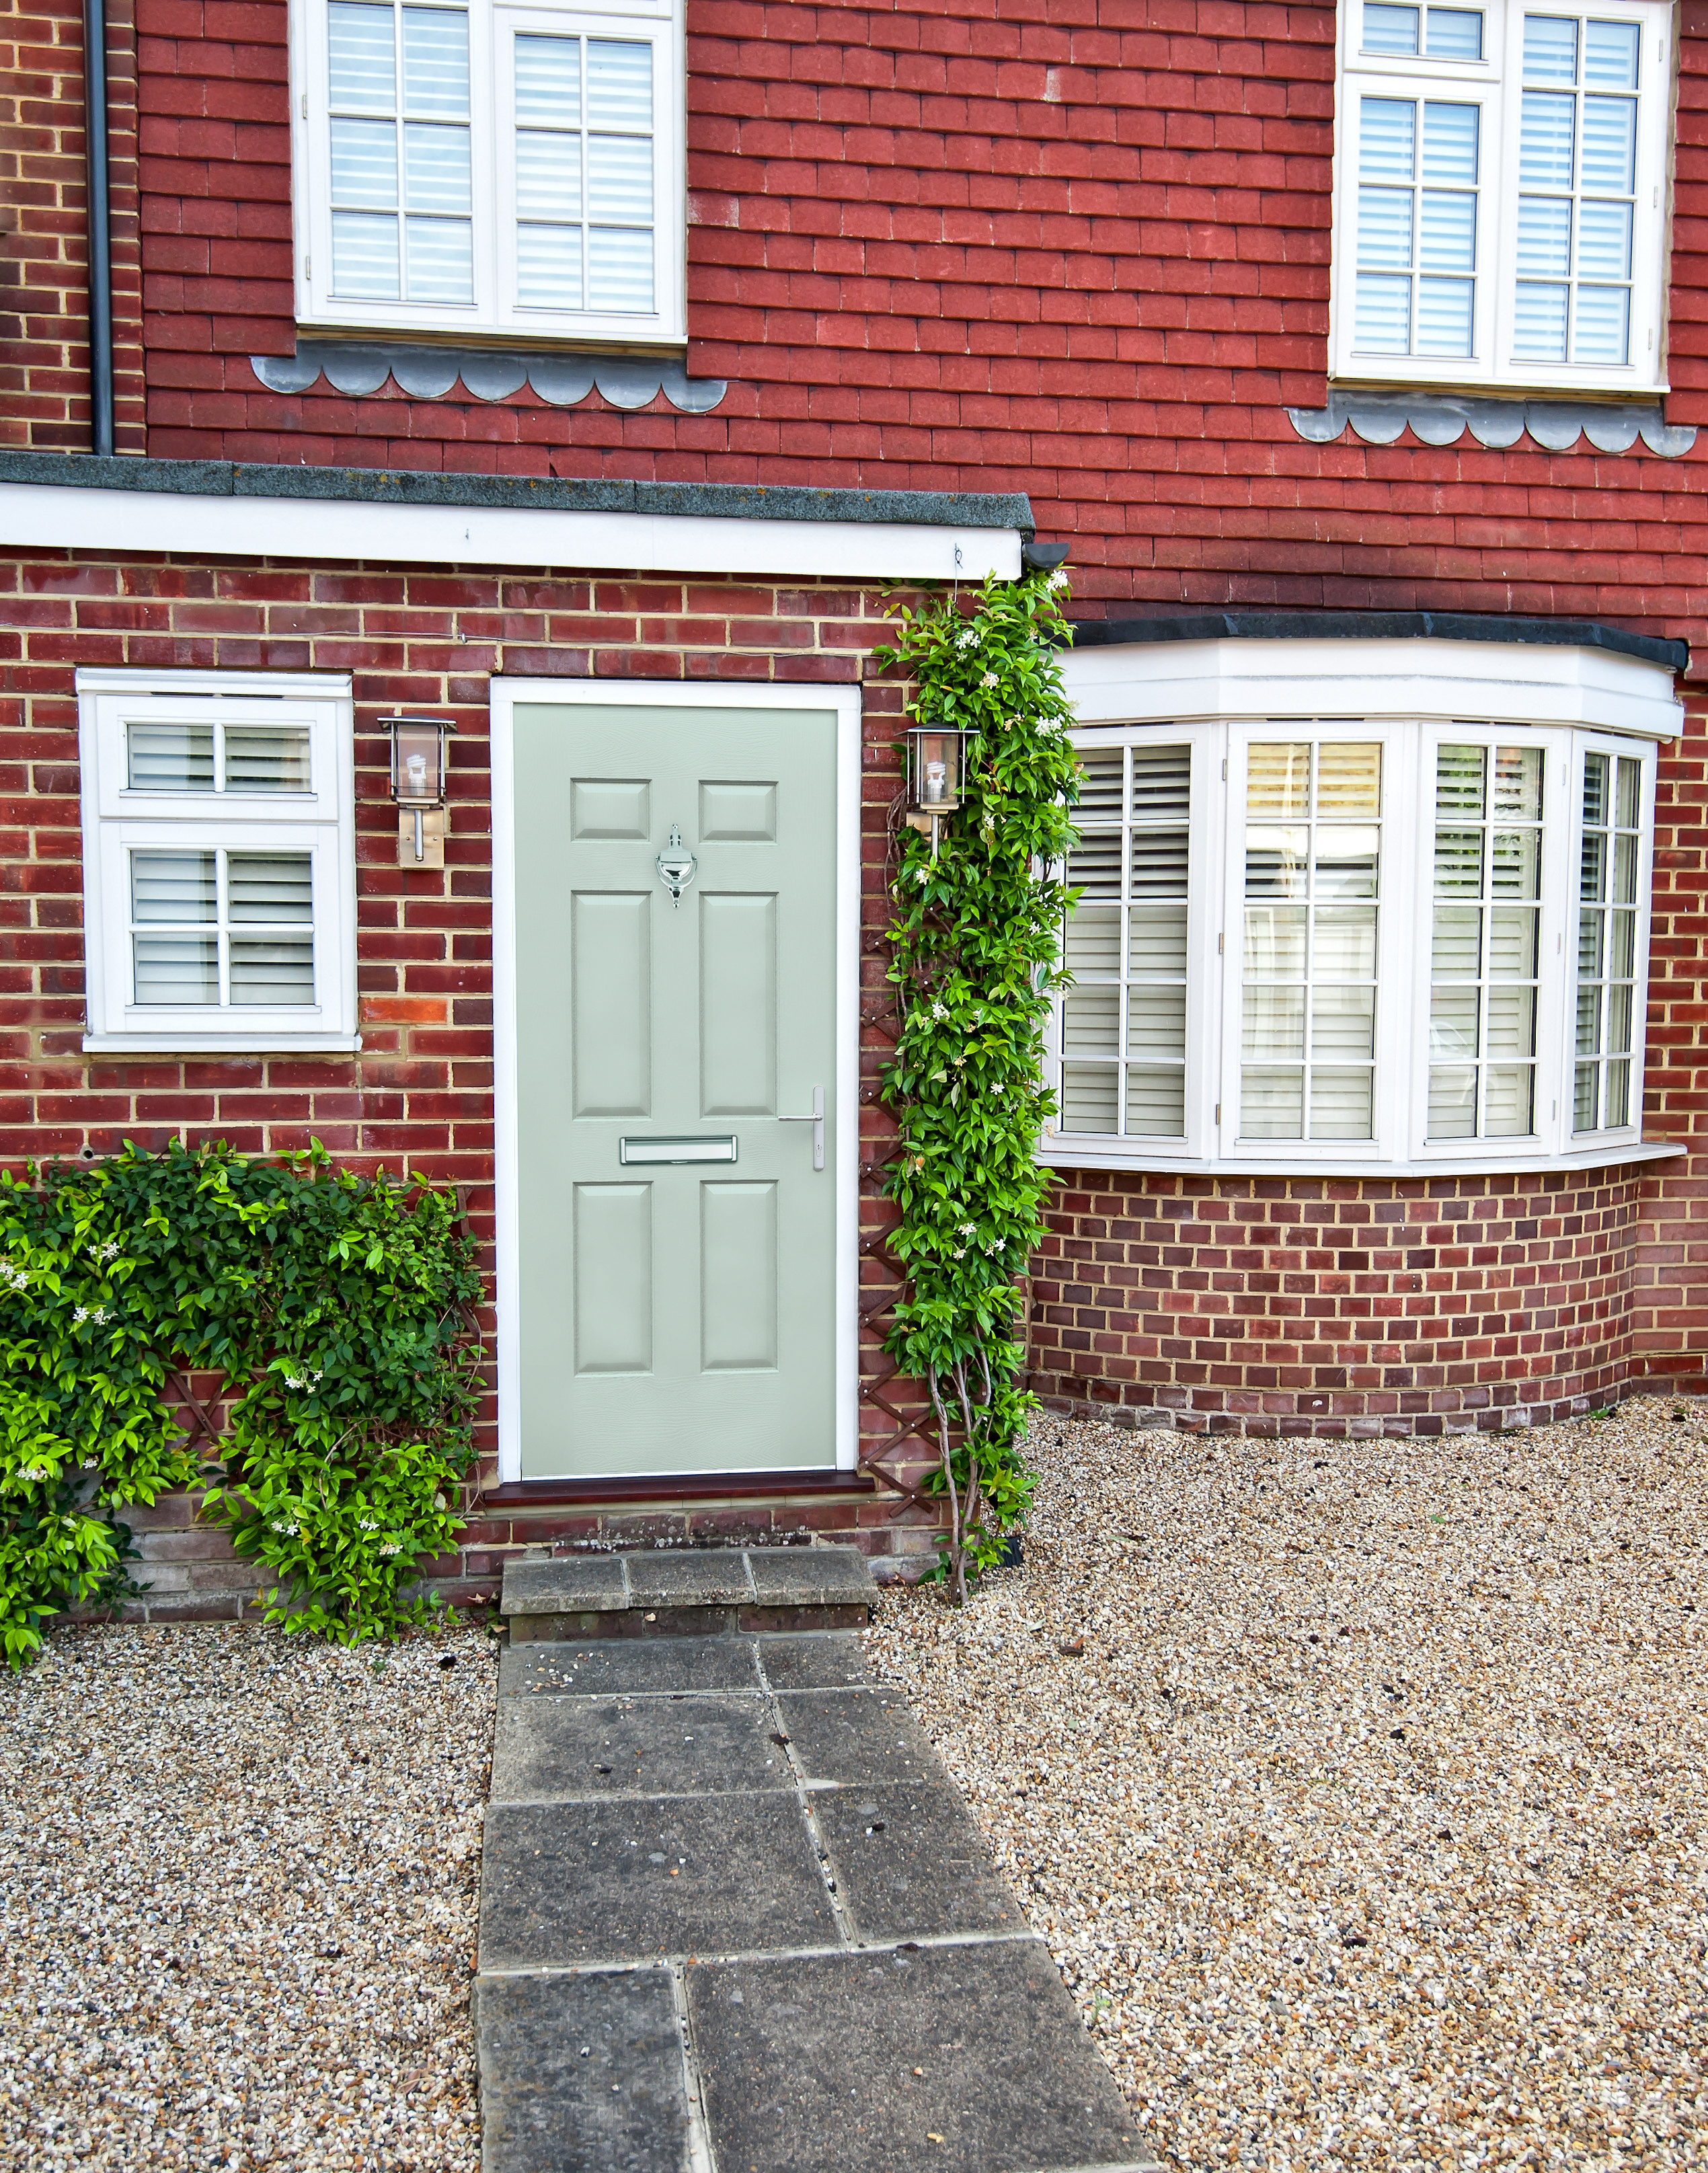 Epwin Windows Systems launches exclusive new range of composite door leaves